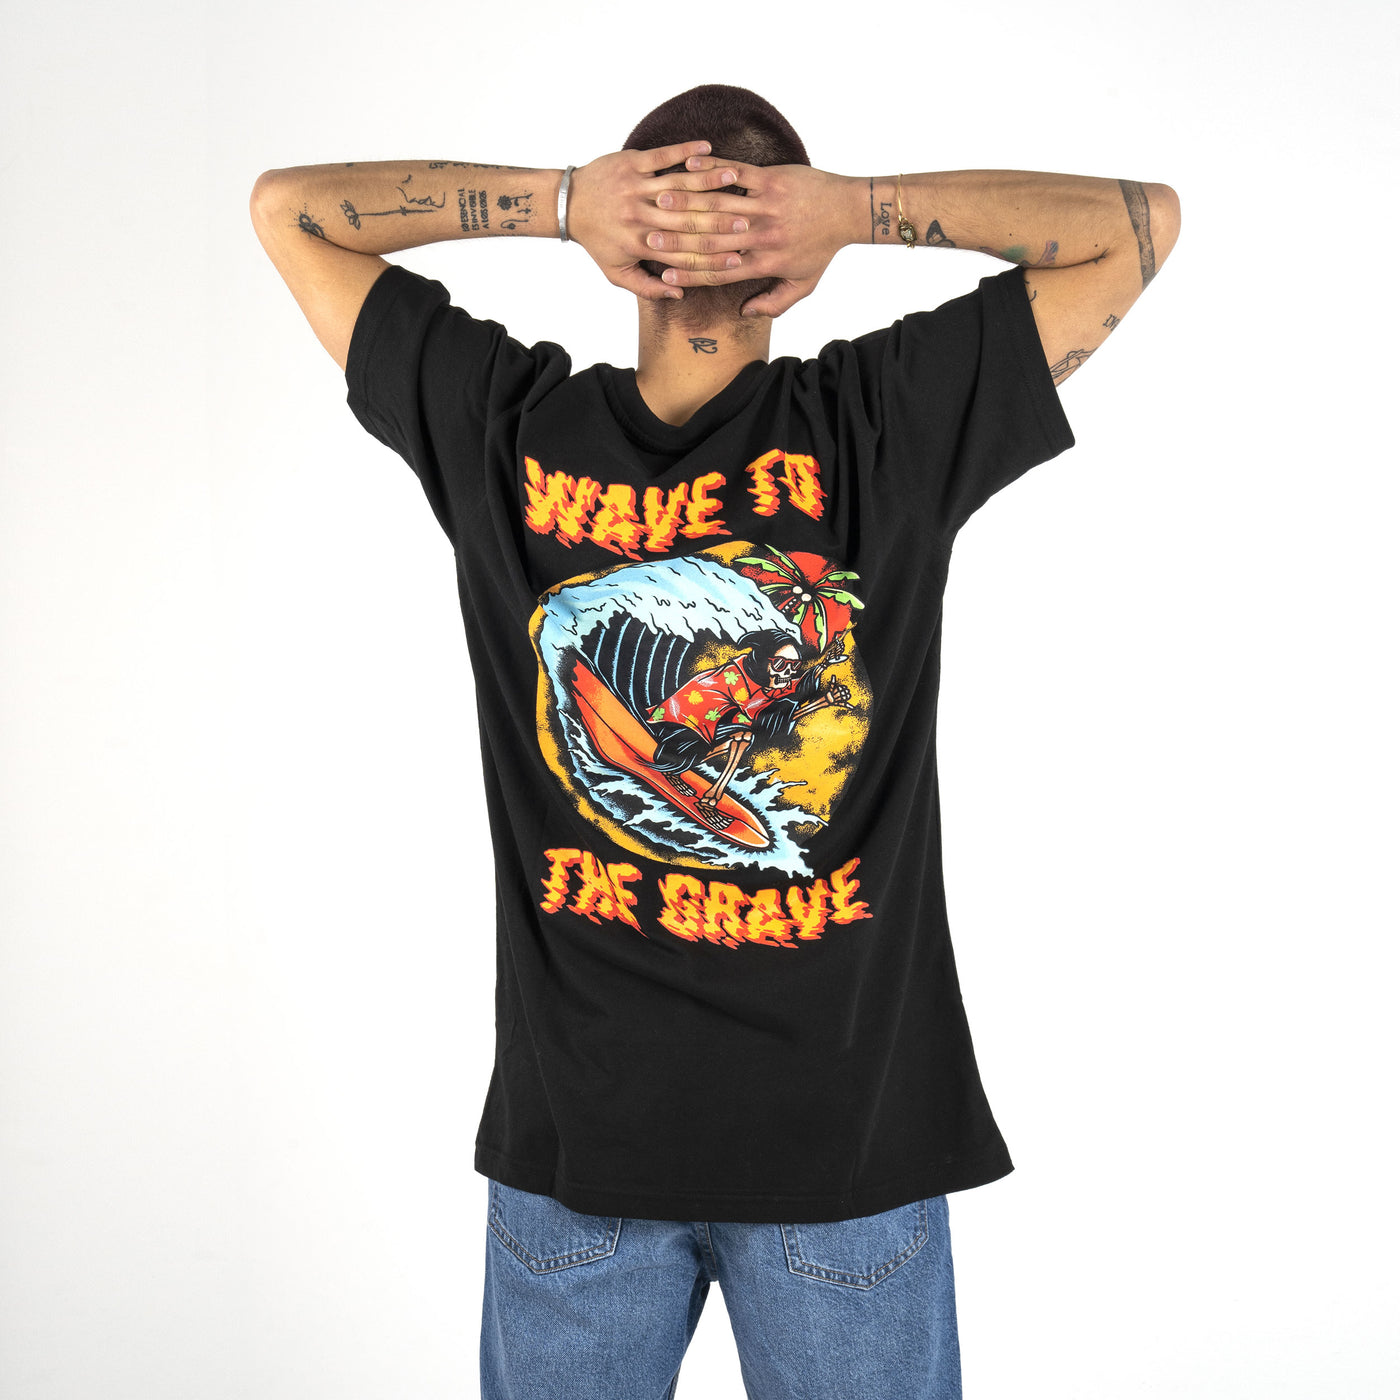 Wave to the Grave - Camiseta